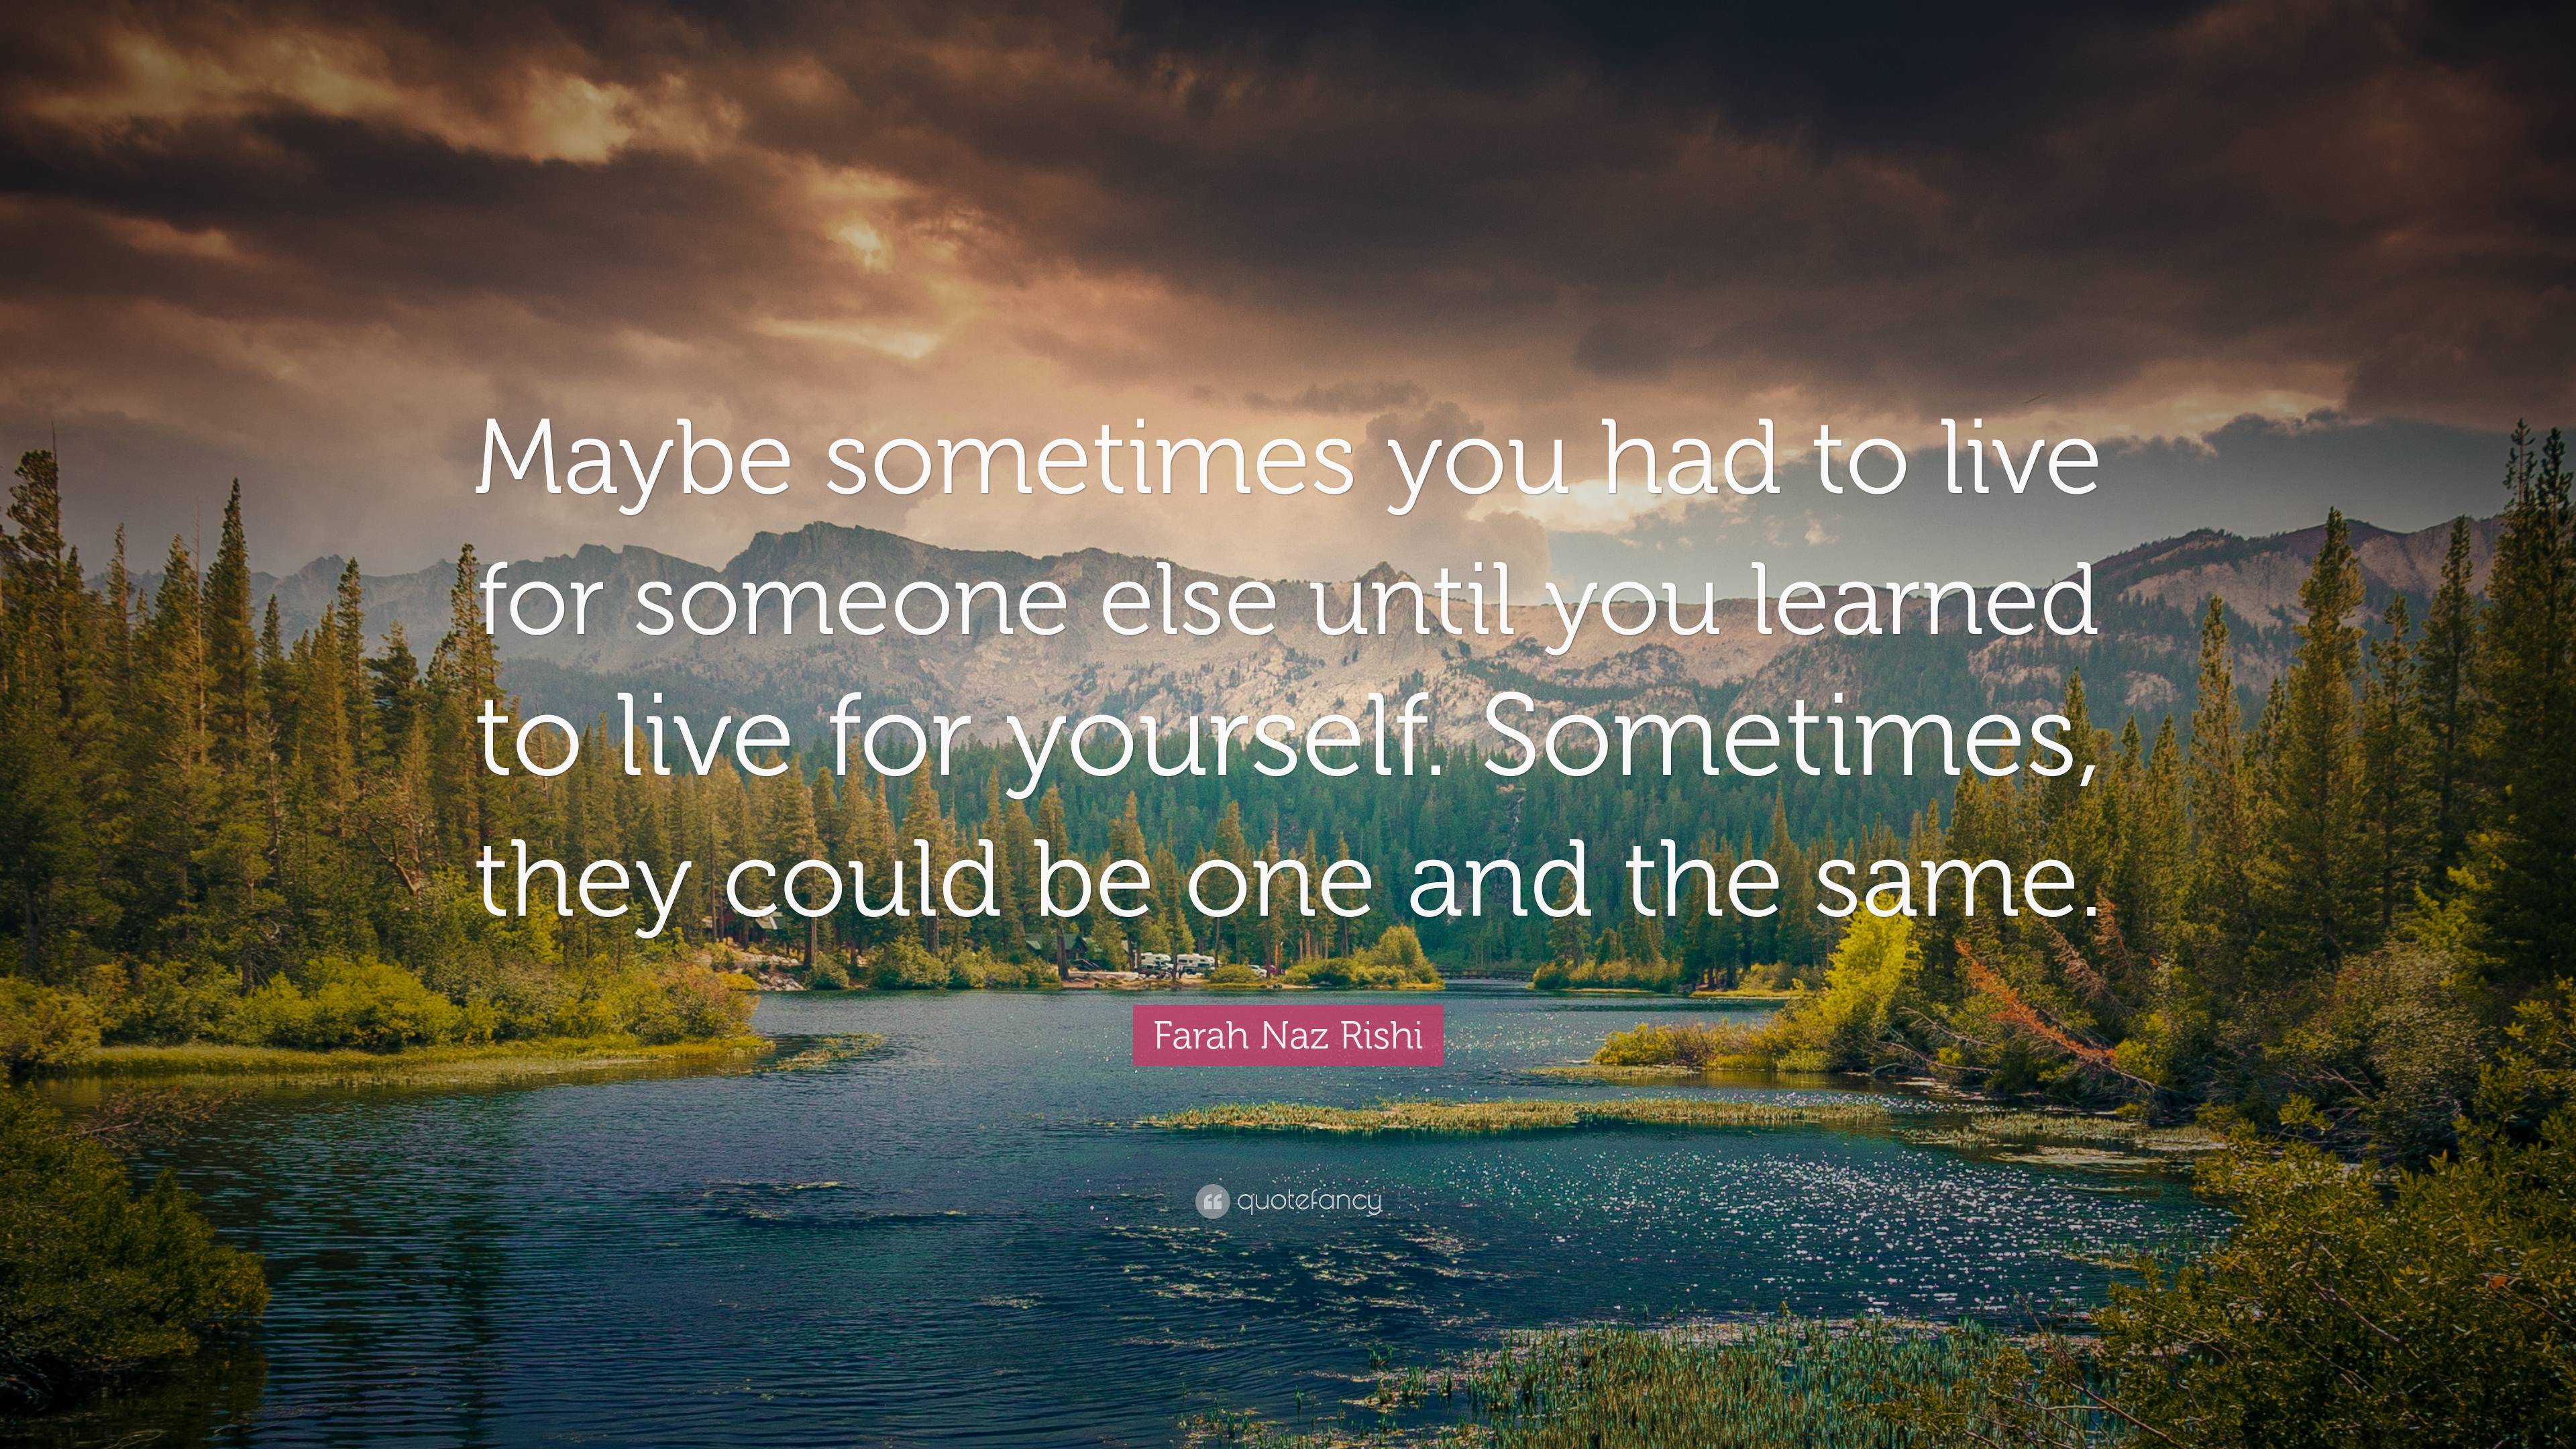 Farah Naz Rishi Quote: “Maybe sometimes you had to live for someone ...